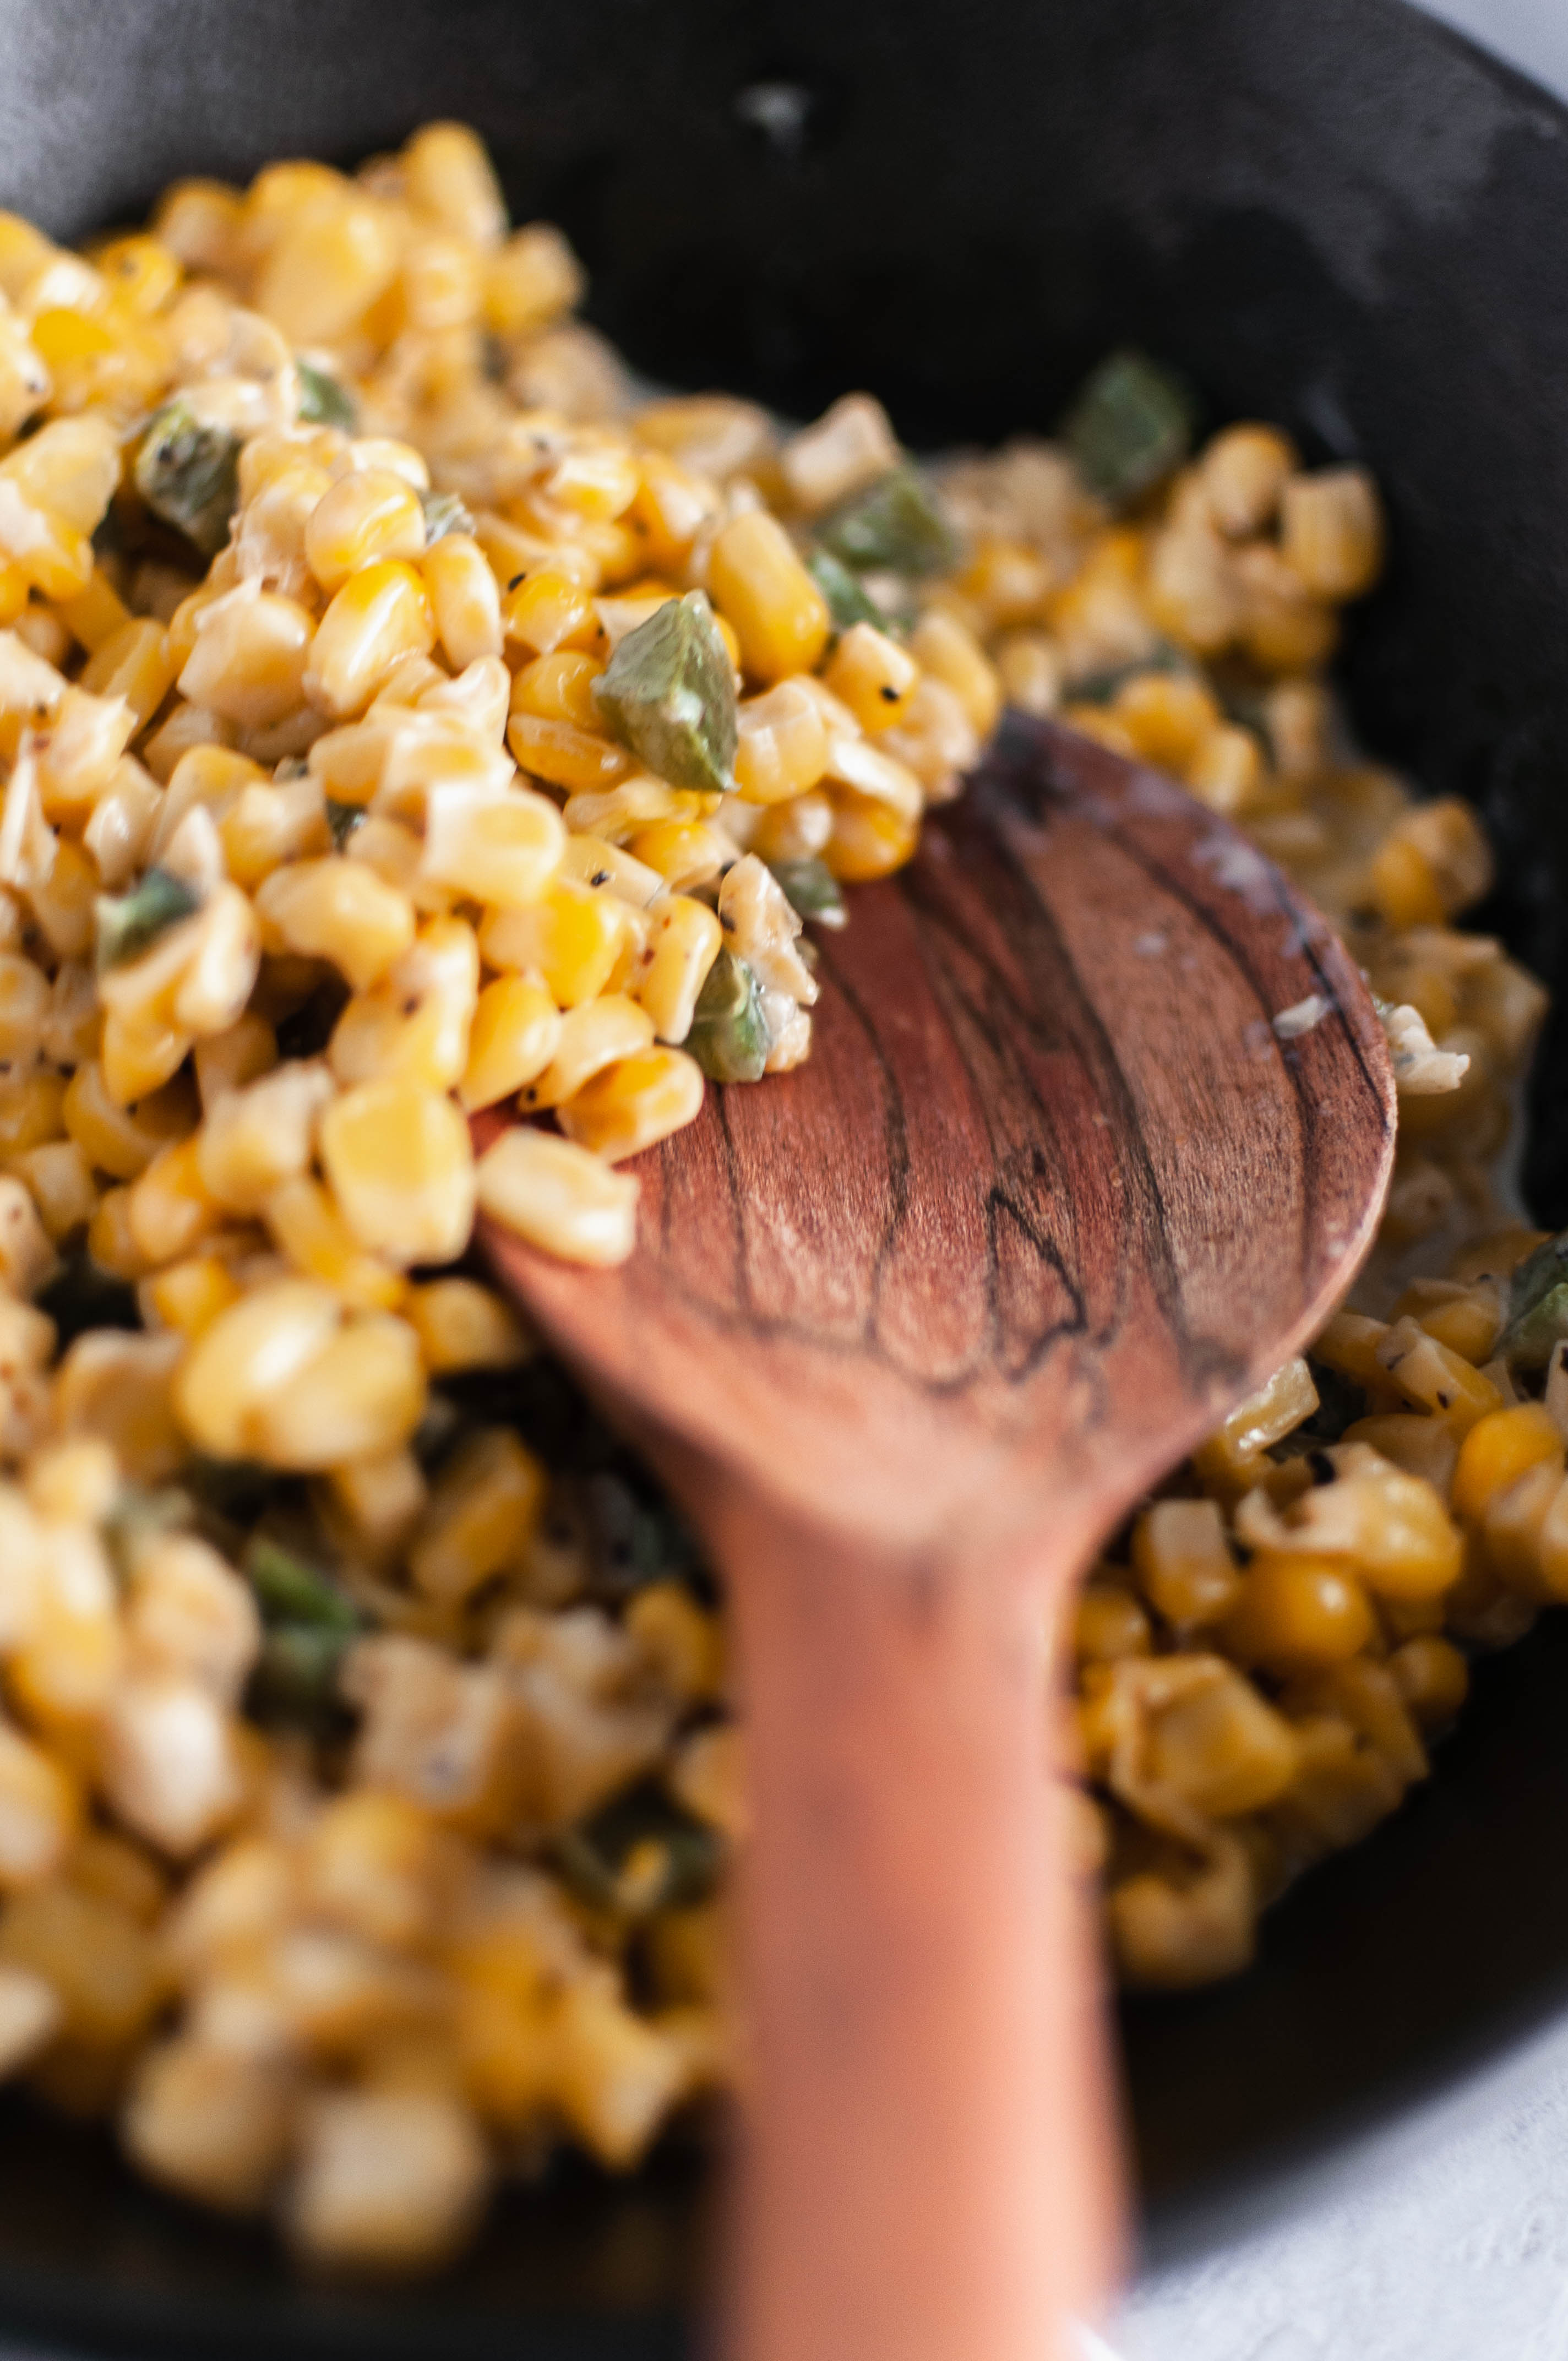 This Jalapeno Cream Corn is slightly spicy, a little sweet and perfectly creamy. It makes a great weeknight side dish or simple holiday option. Made on the stove top with frozen sweet corn, fresh jalapenos, butter and half and half. Ready to serve in minutes.